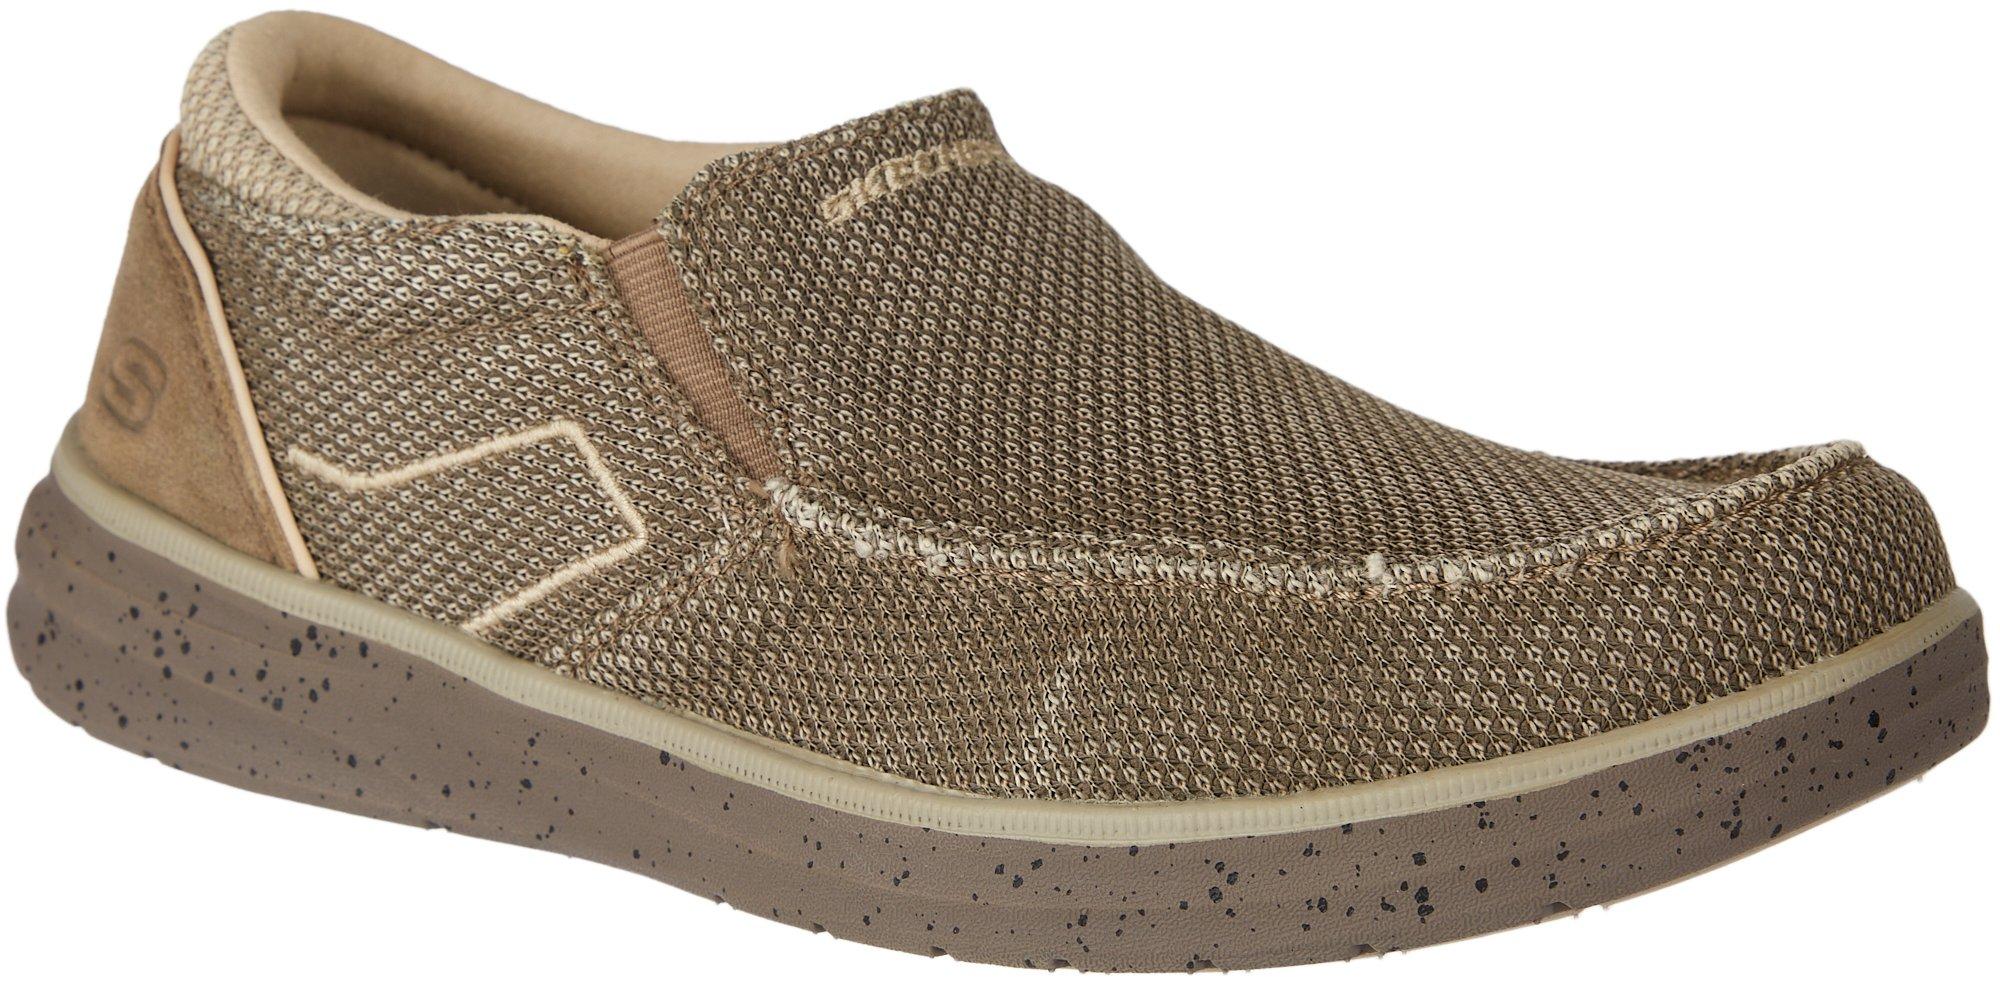 Skechers Mens Morelo-Point View Slip On Casual